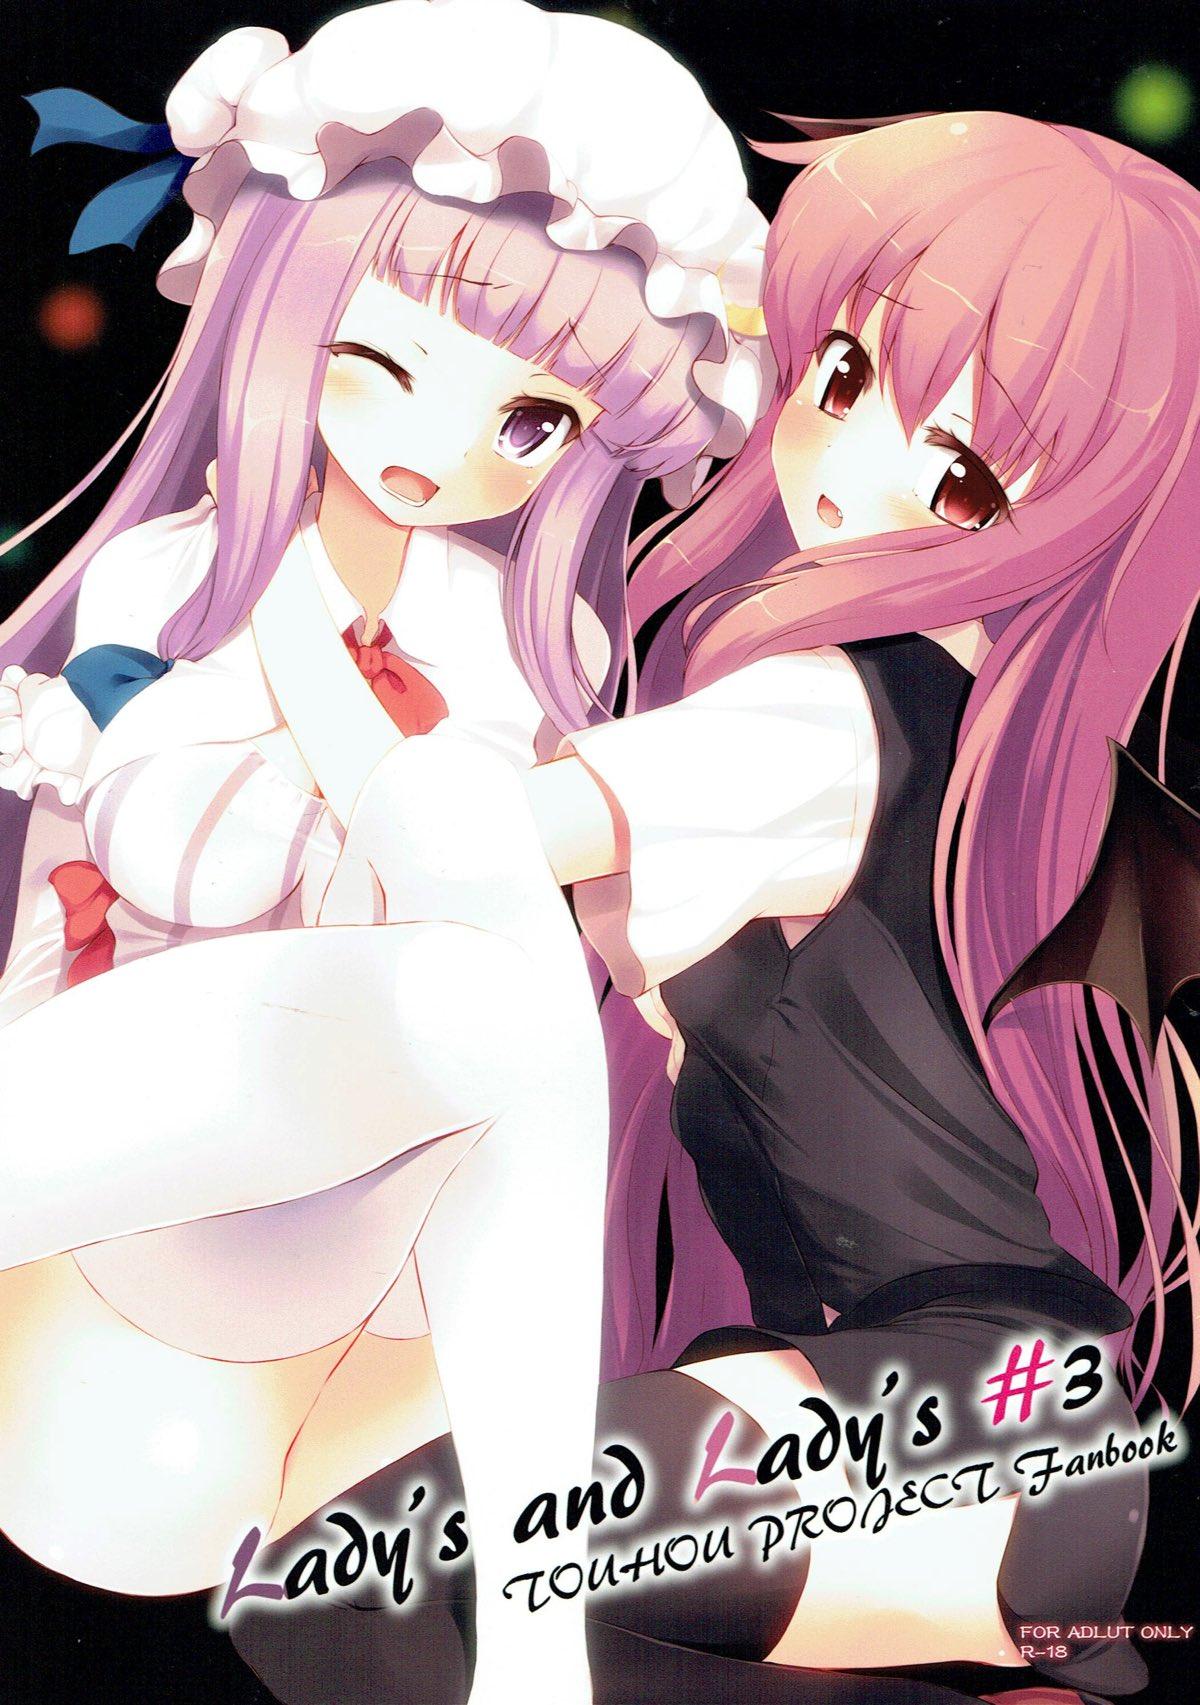 Massive Lady's and Lady's #3 - Touhou project Love - Picture 1